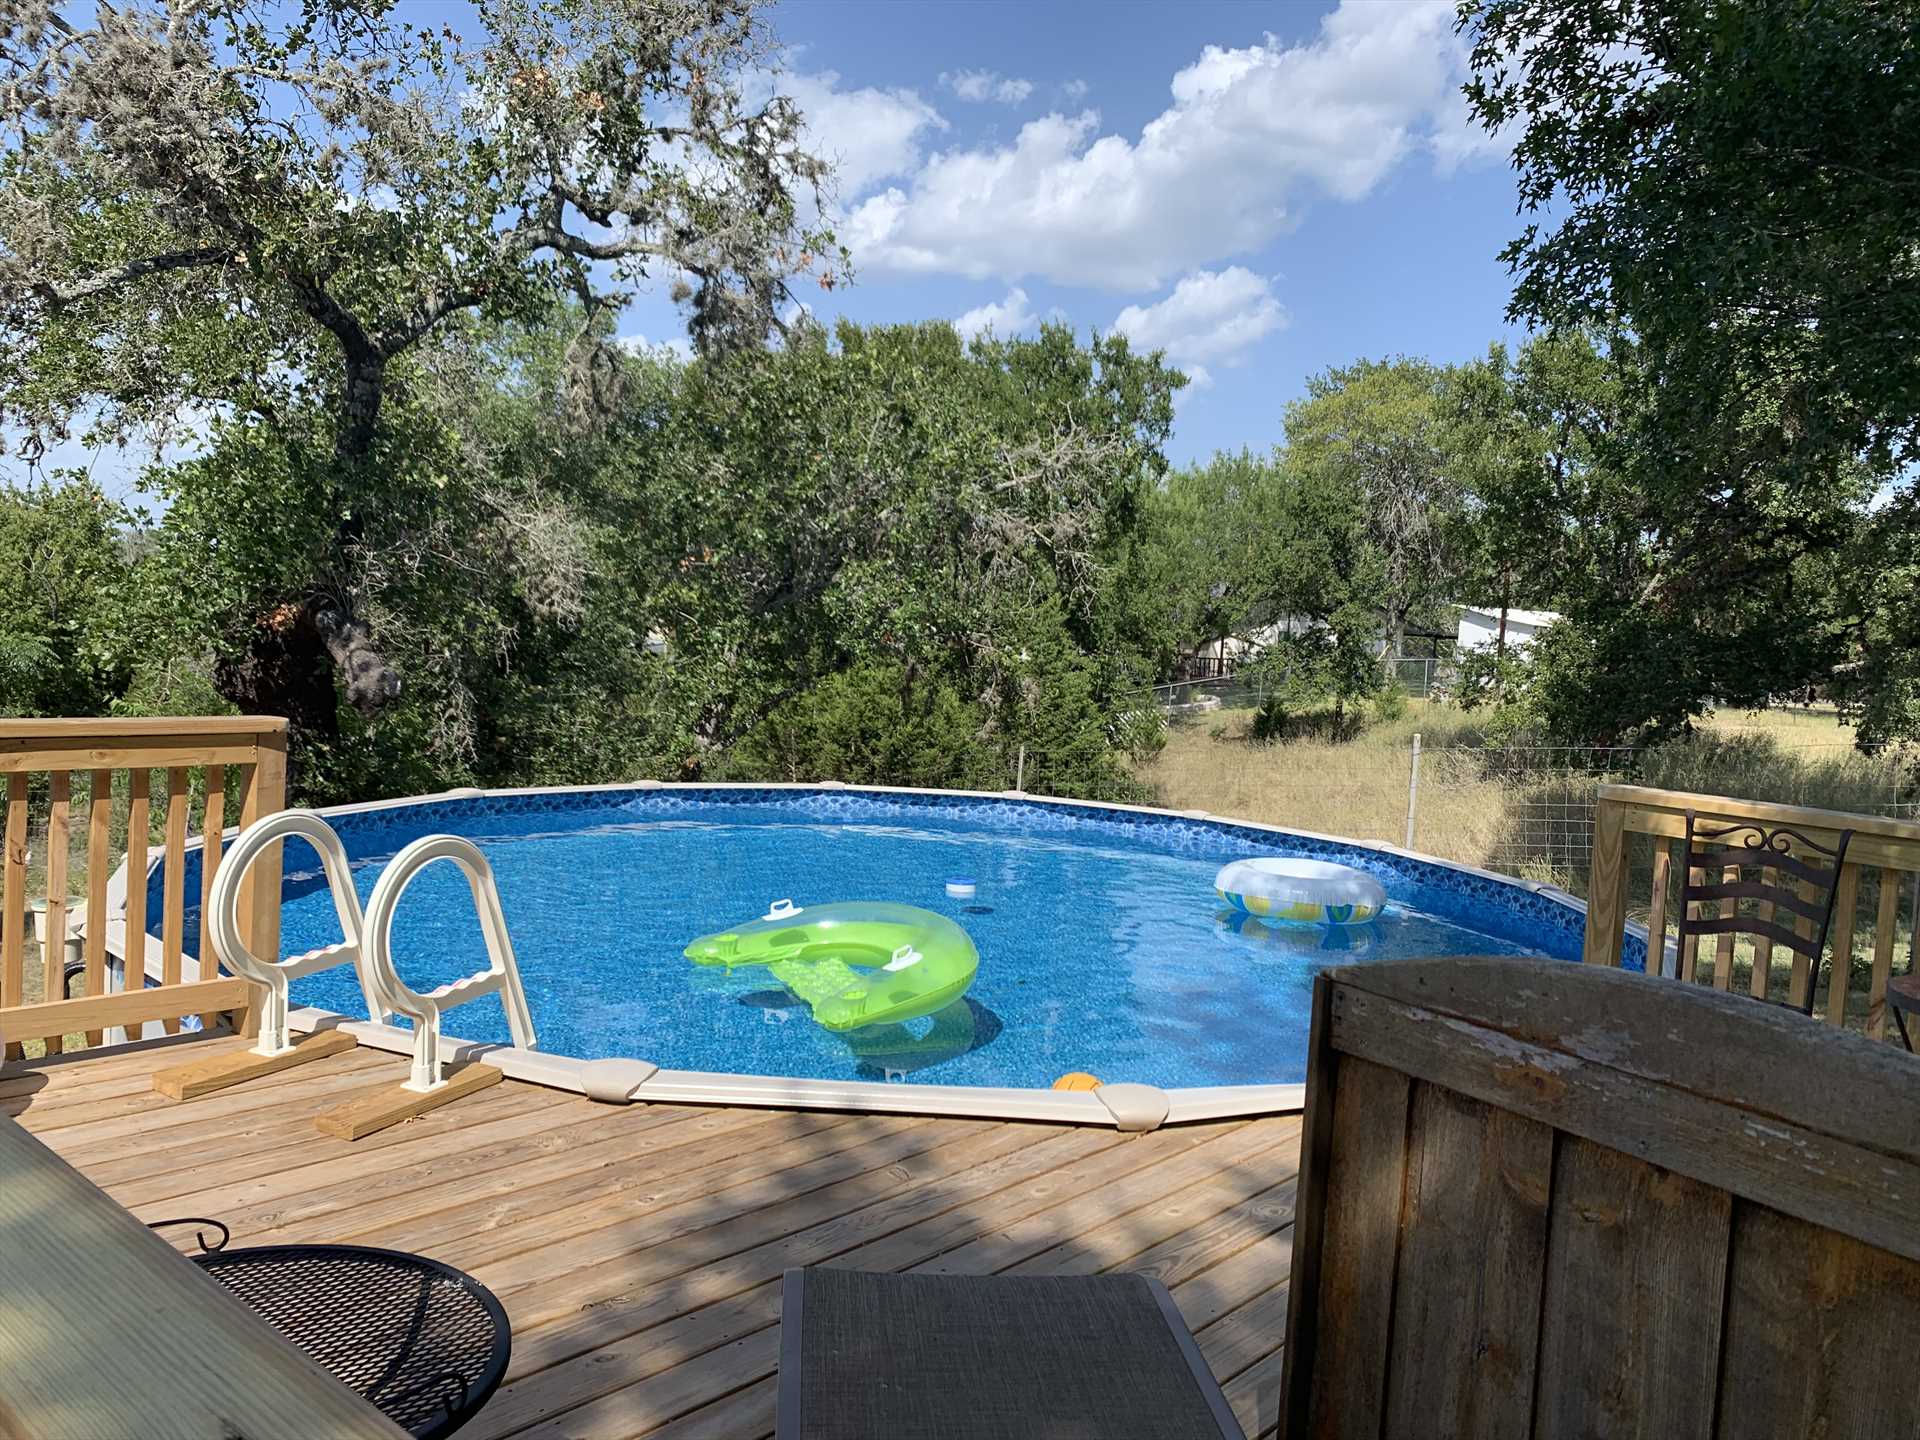                                                 Noting takes the edge off the Texas heat like a refreshing dip in the pool!